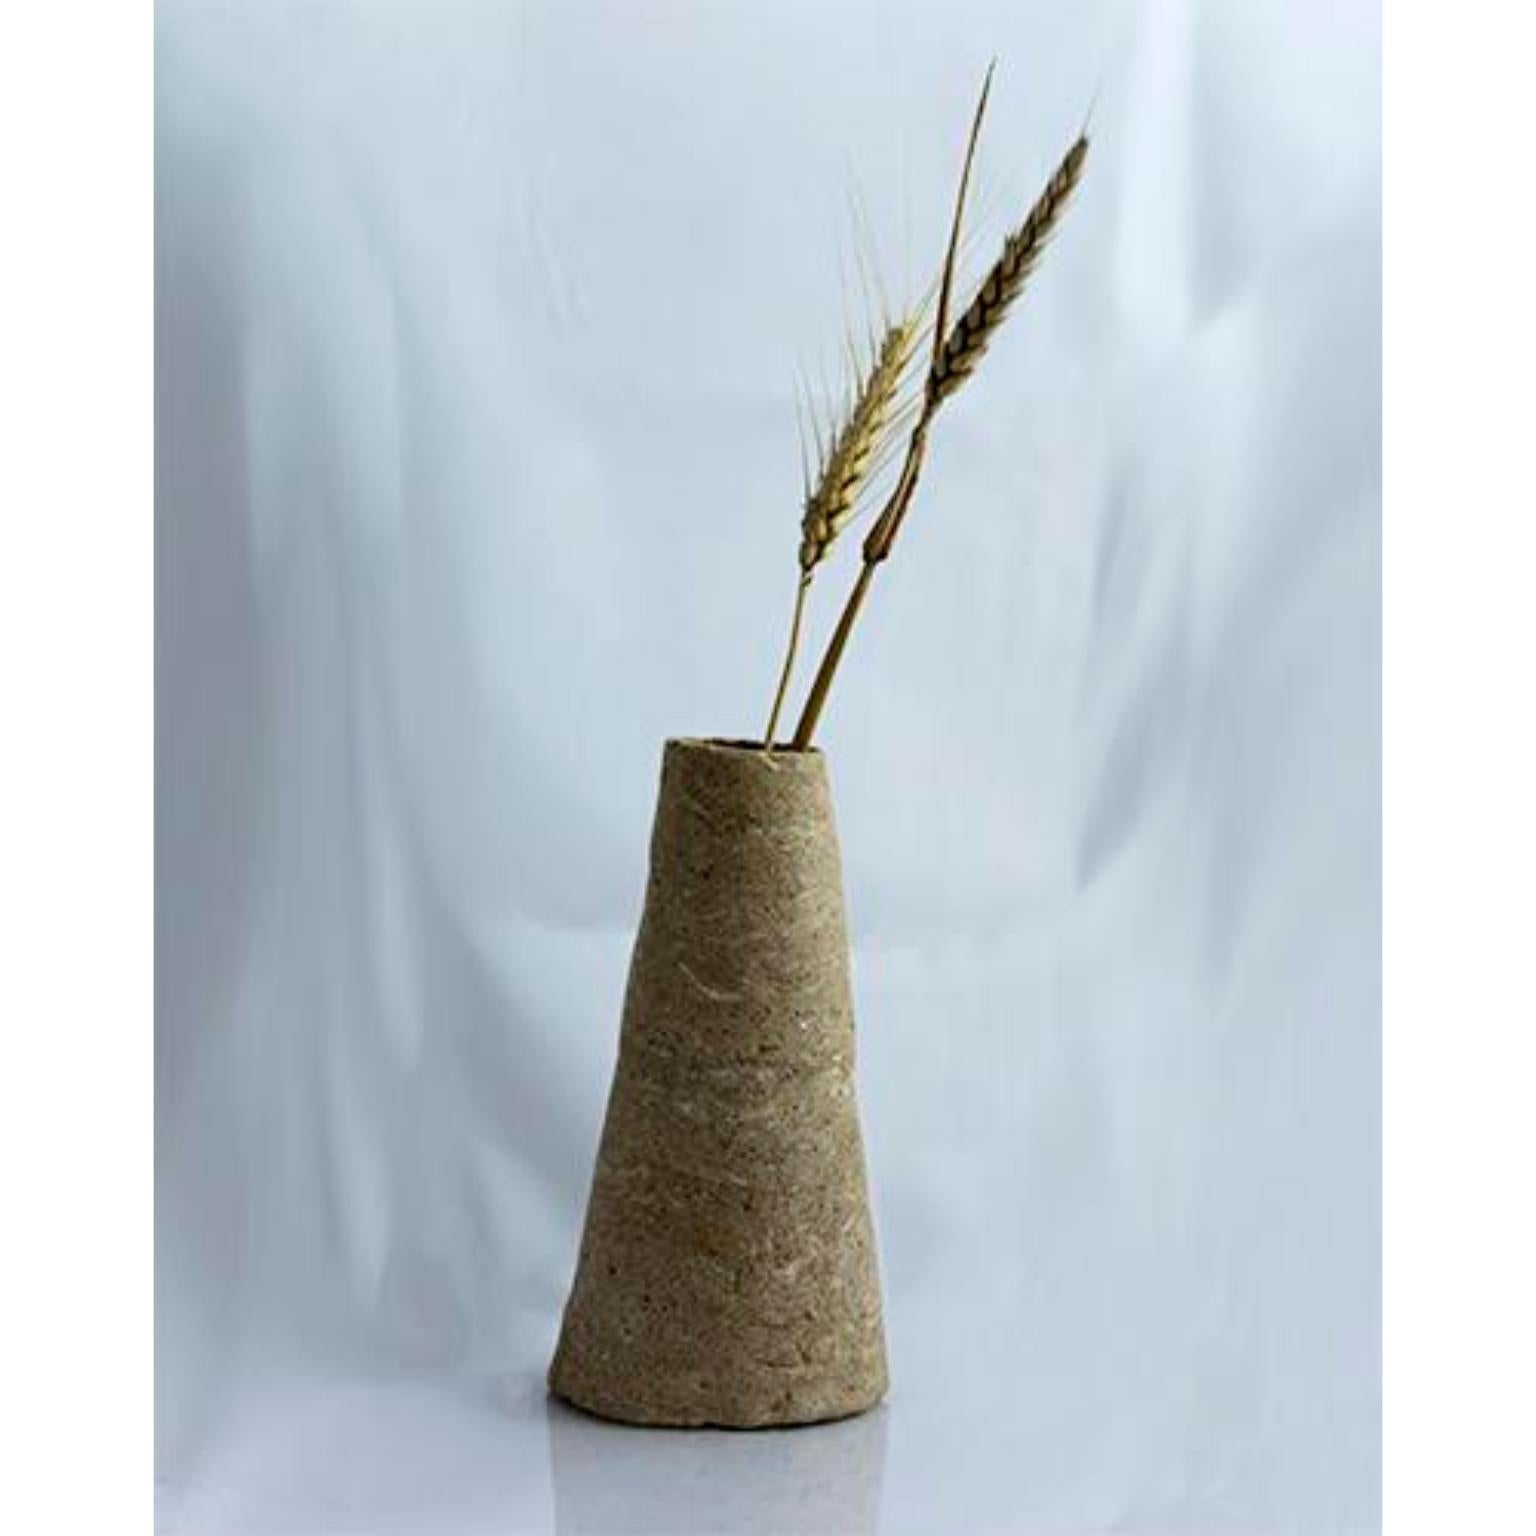 Set of 2 Alimenta vase by Riccardo Cenedella
Dimensions: D 9 x H 20 cm
Materials: Food waste based material

I am Riccardo Cenedella I graduated in Product Design from Politecnico di Torino in 2016 and straight after my graduation I started to